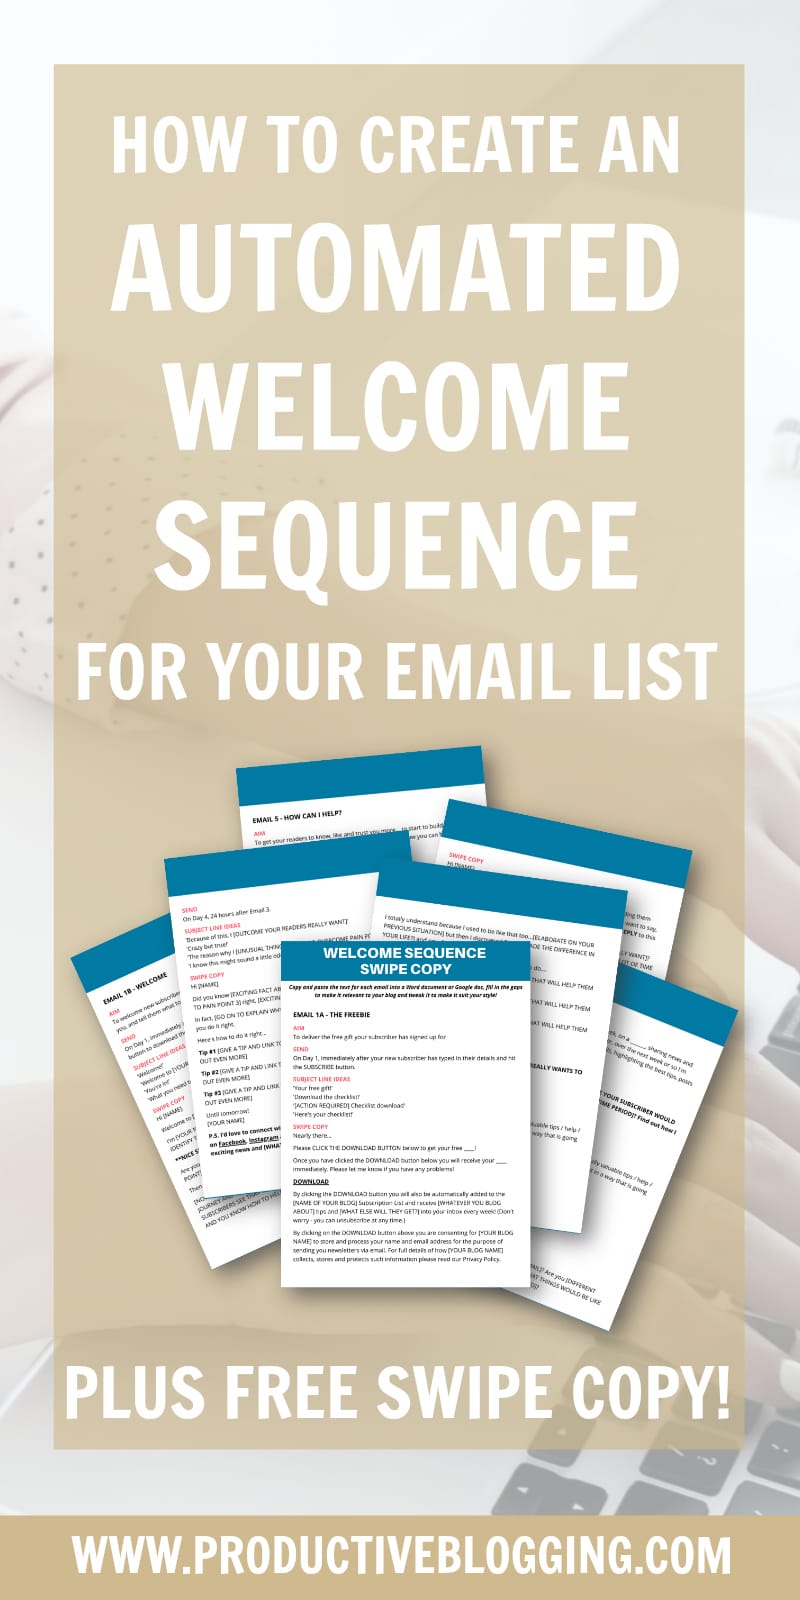 When new subscribers join your list, it’s good to welcome them properly…before they forget why they signed up for your list and click ‘unsubscribe’… Here’s how to create an automated welcome sequence for your email list. #welcomesequence #emailwelcomesequence #autoresponser #nurturesequence #emailmarketing #growyouremaillist #emailmarketingtips #emaillist #emaillistgrowth #listbuilding #subscribers #convertkit #growyourblog #bloggrowth #productivitytips #bloggingtips #productiveblogging